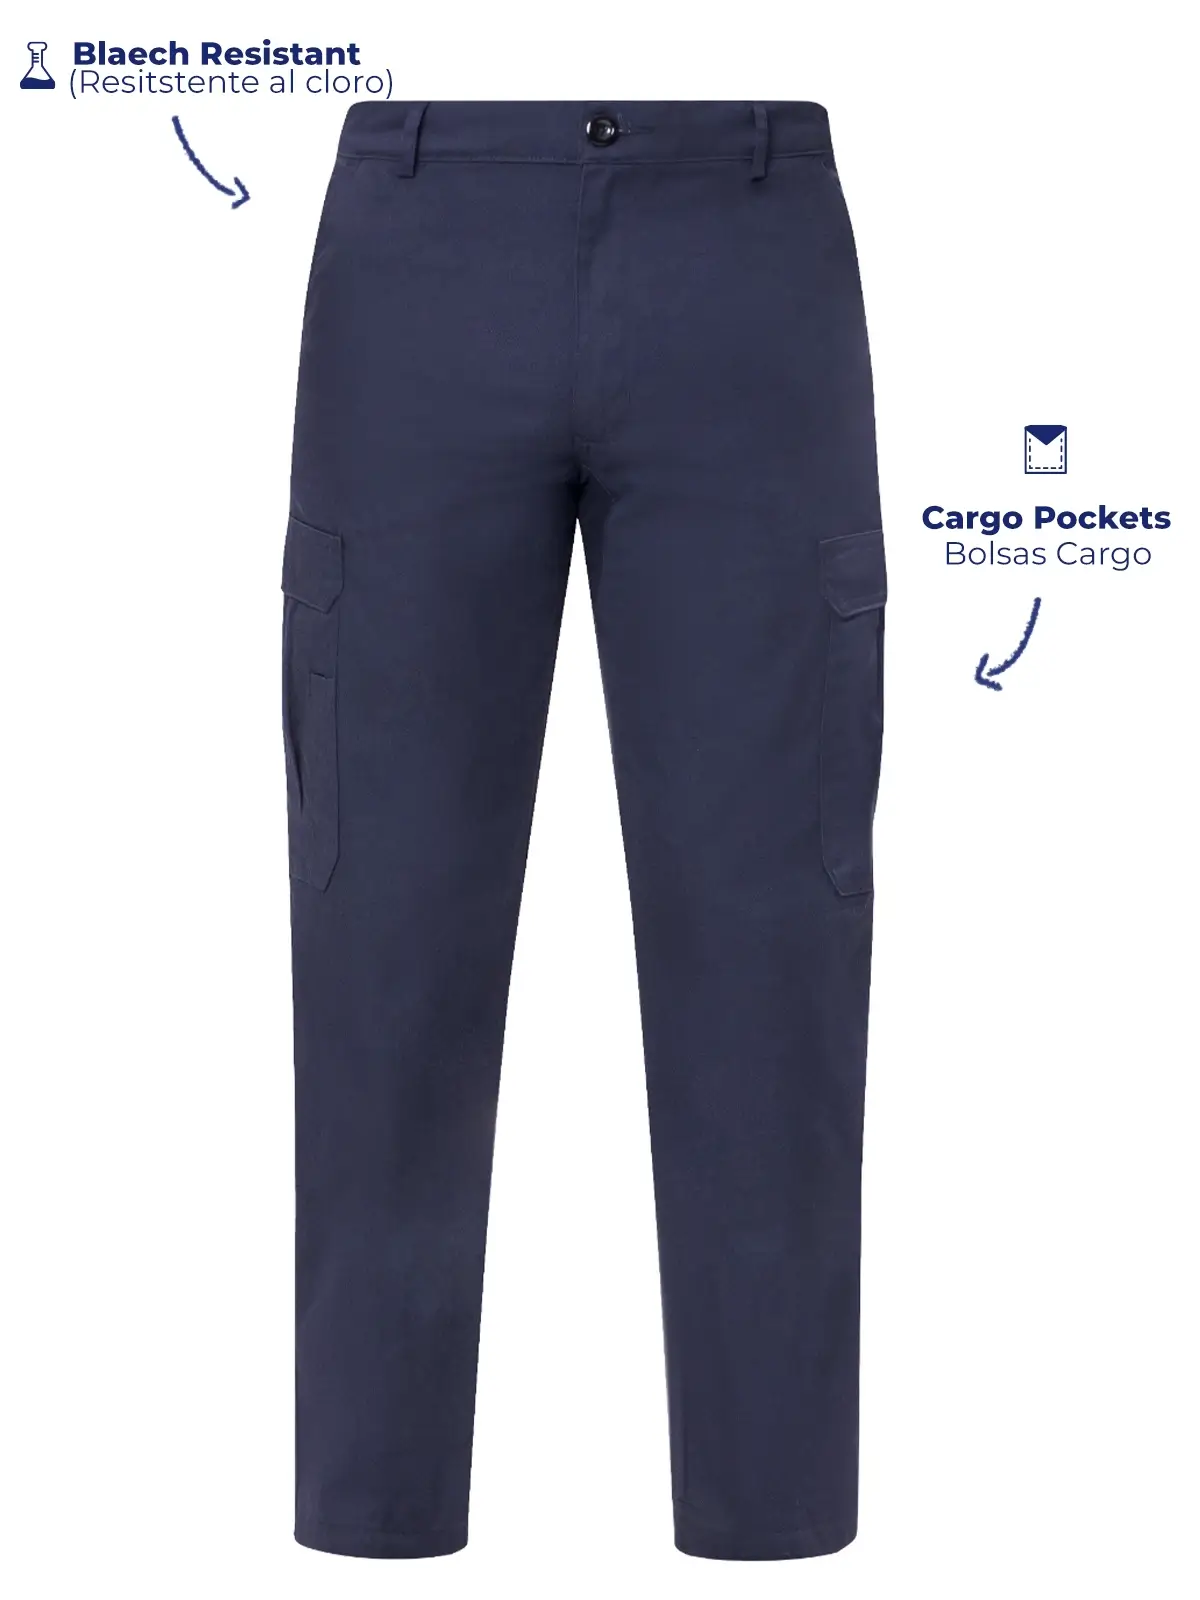 Cargo Pants navy color